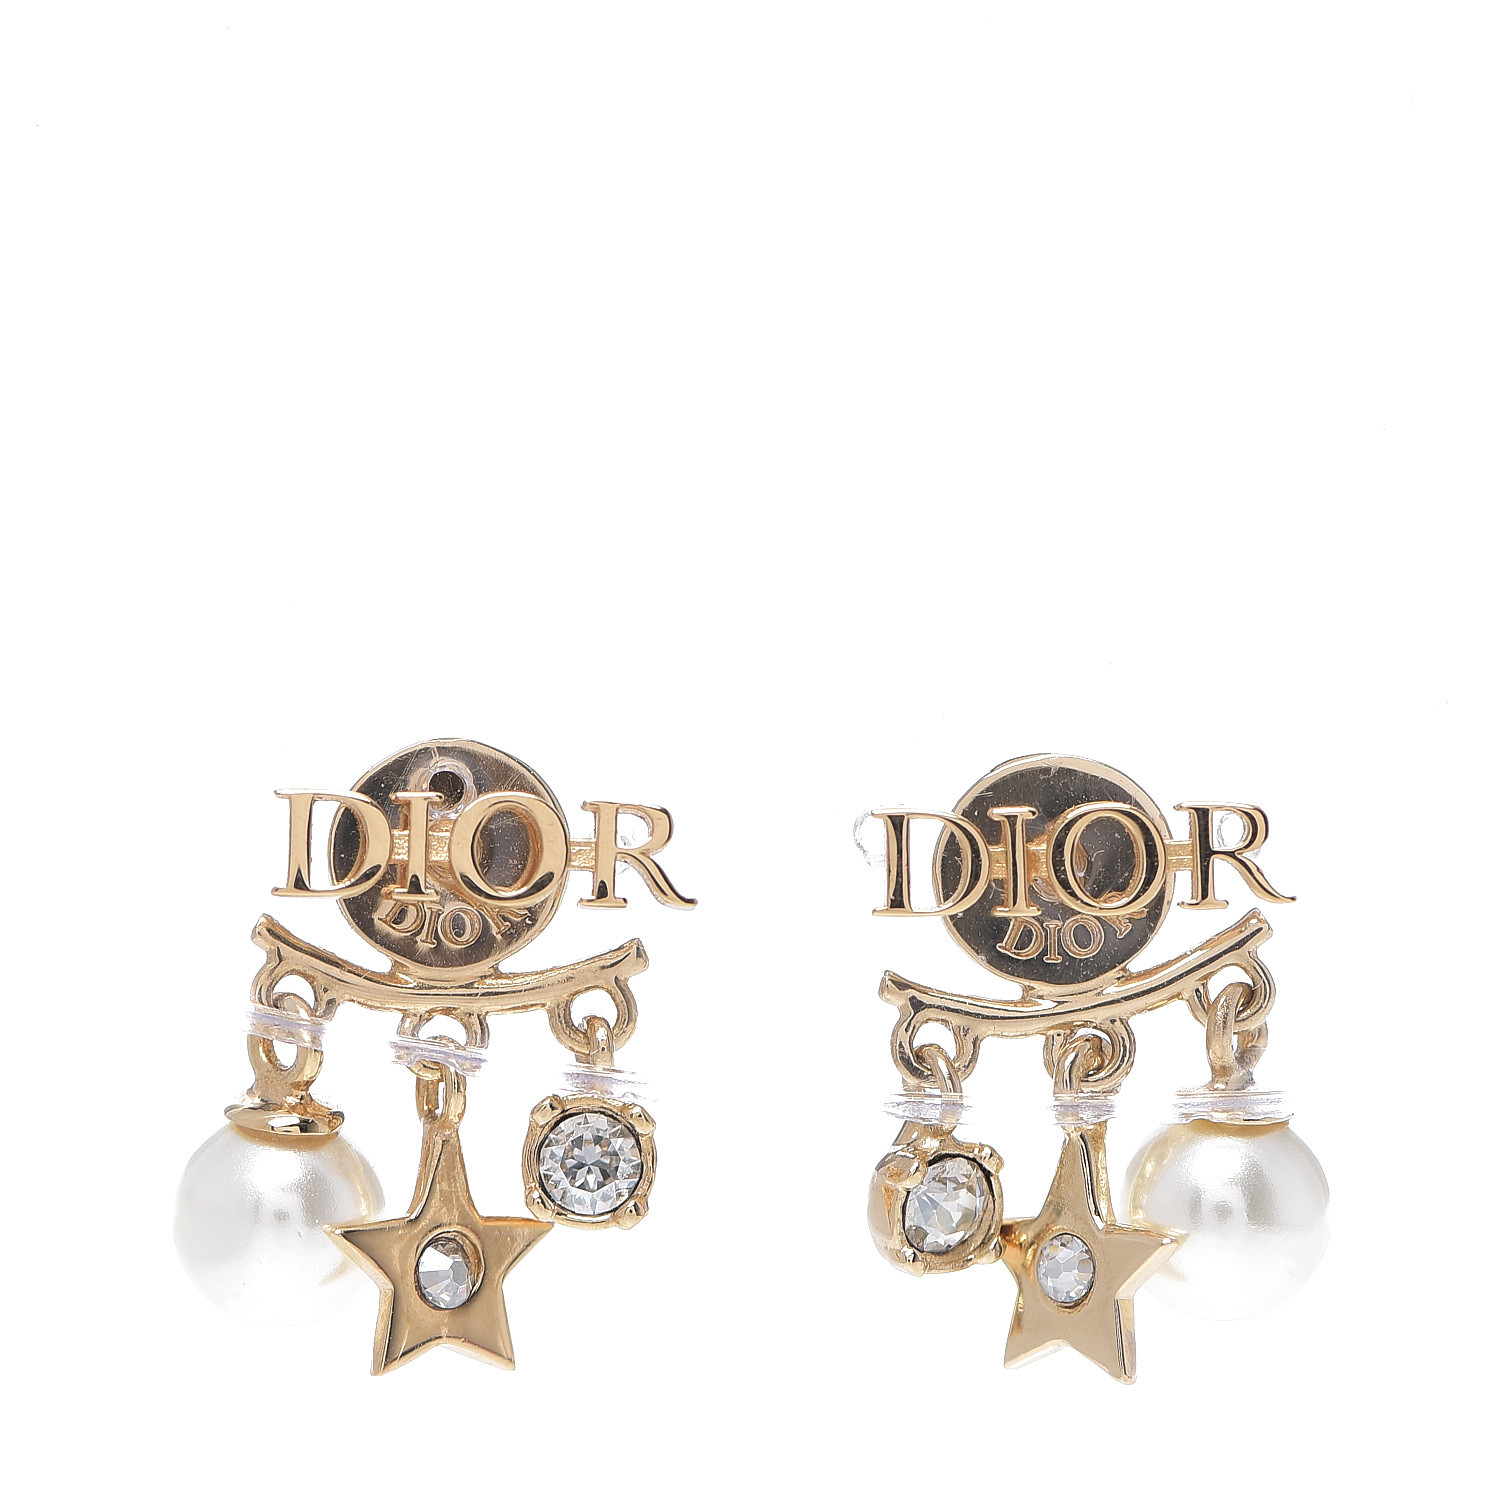 CHRISTIAN DIOR Pearl Crystal Dio(r)evolution Earrings Aged Gold 